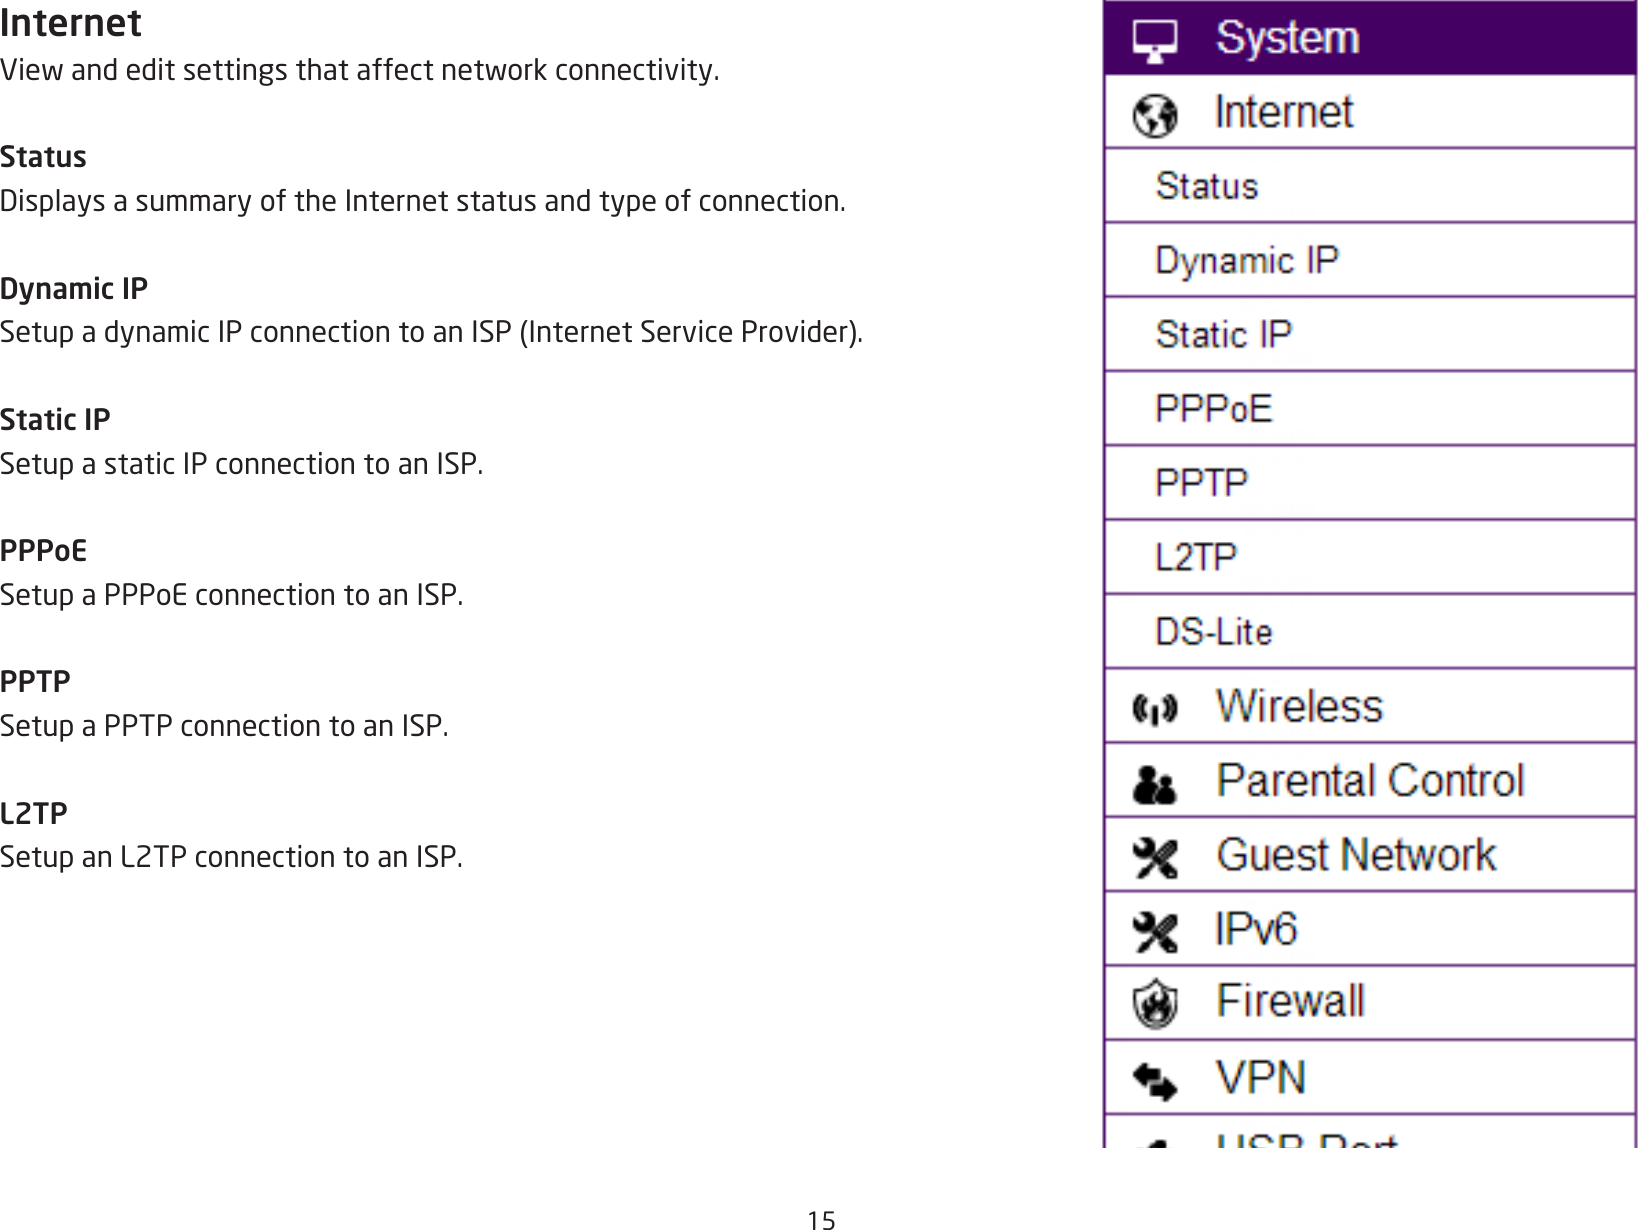 15InternetViewandeditsettingsthataffectnetworkconnectivity.StatusDisplaysasummaryoftheInternetstatusandtypeofconnection.Dynamic IPSetupadynamicIPconnectiontoanISP(InternetServiceProvider).Static IPSetup a static IP connection to an ISP.PPPoESetup a PPPoE connection to an ISP.PPTPSetup a PPTP connection to an ISP.L2TPSetup an L2TP connection to an ISP.